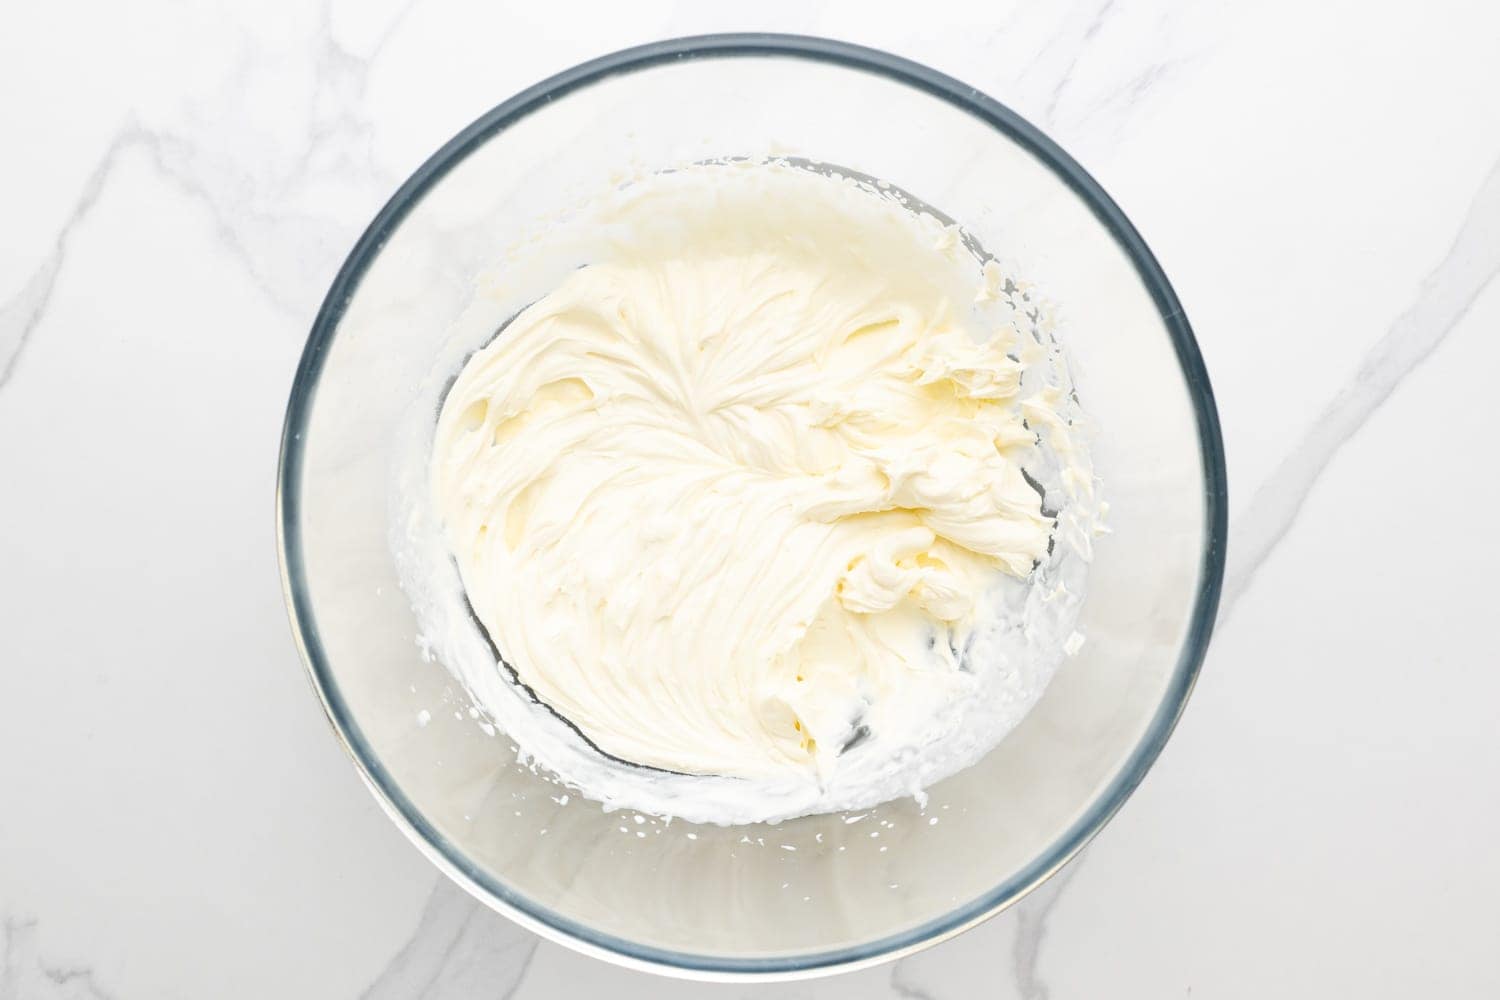 a glass mixing bowl of whipped cream.